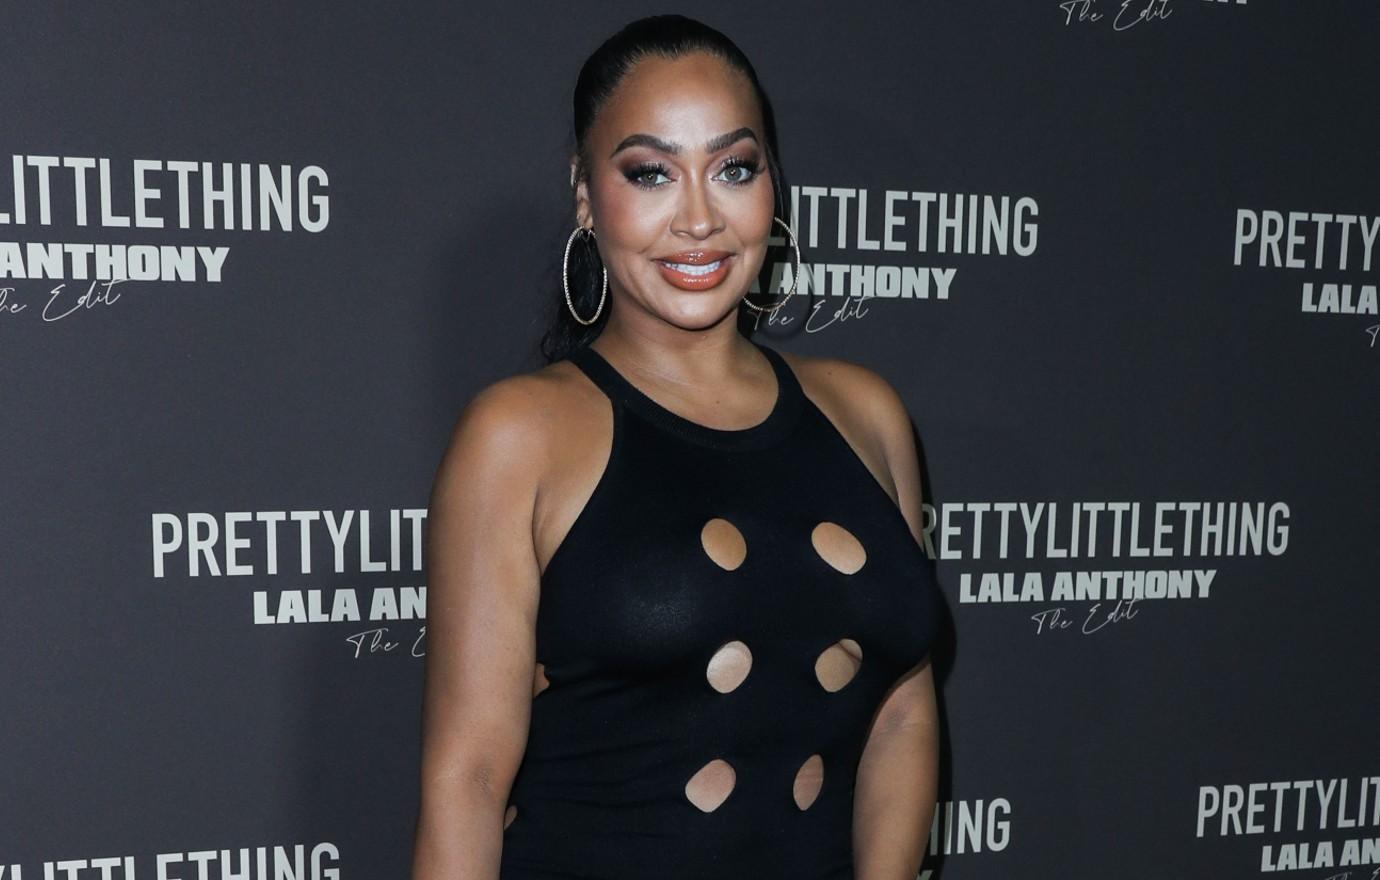 La La Anthony Claims Only Men In Their 20s Are Interested In Her